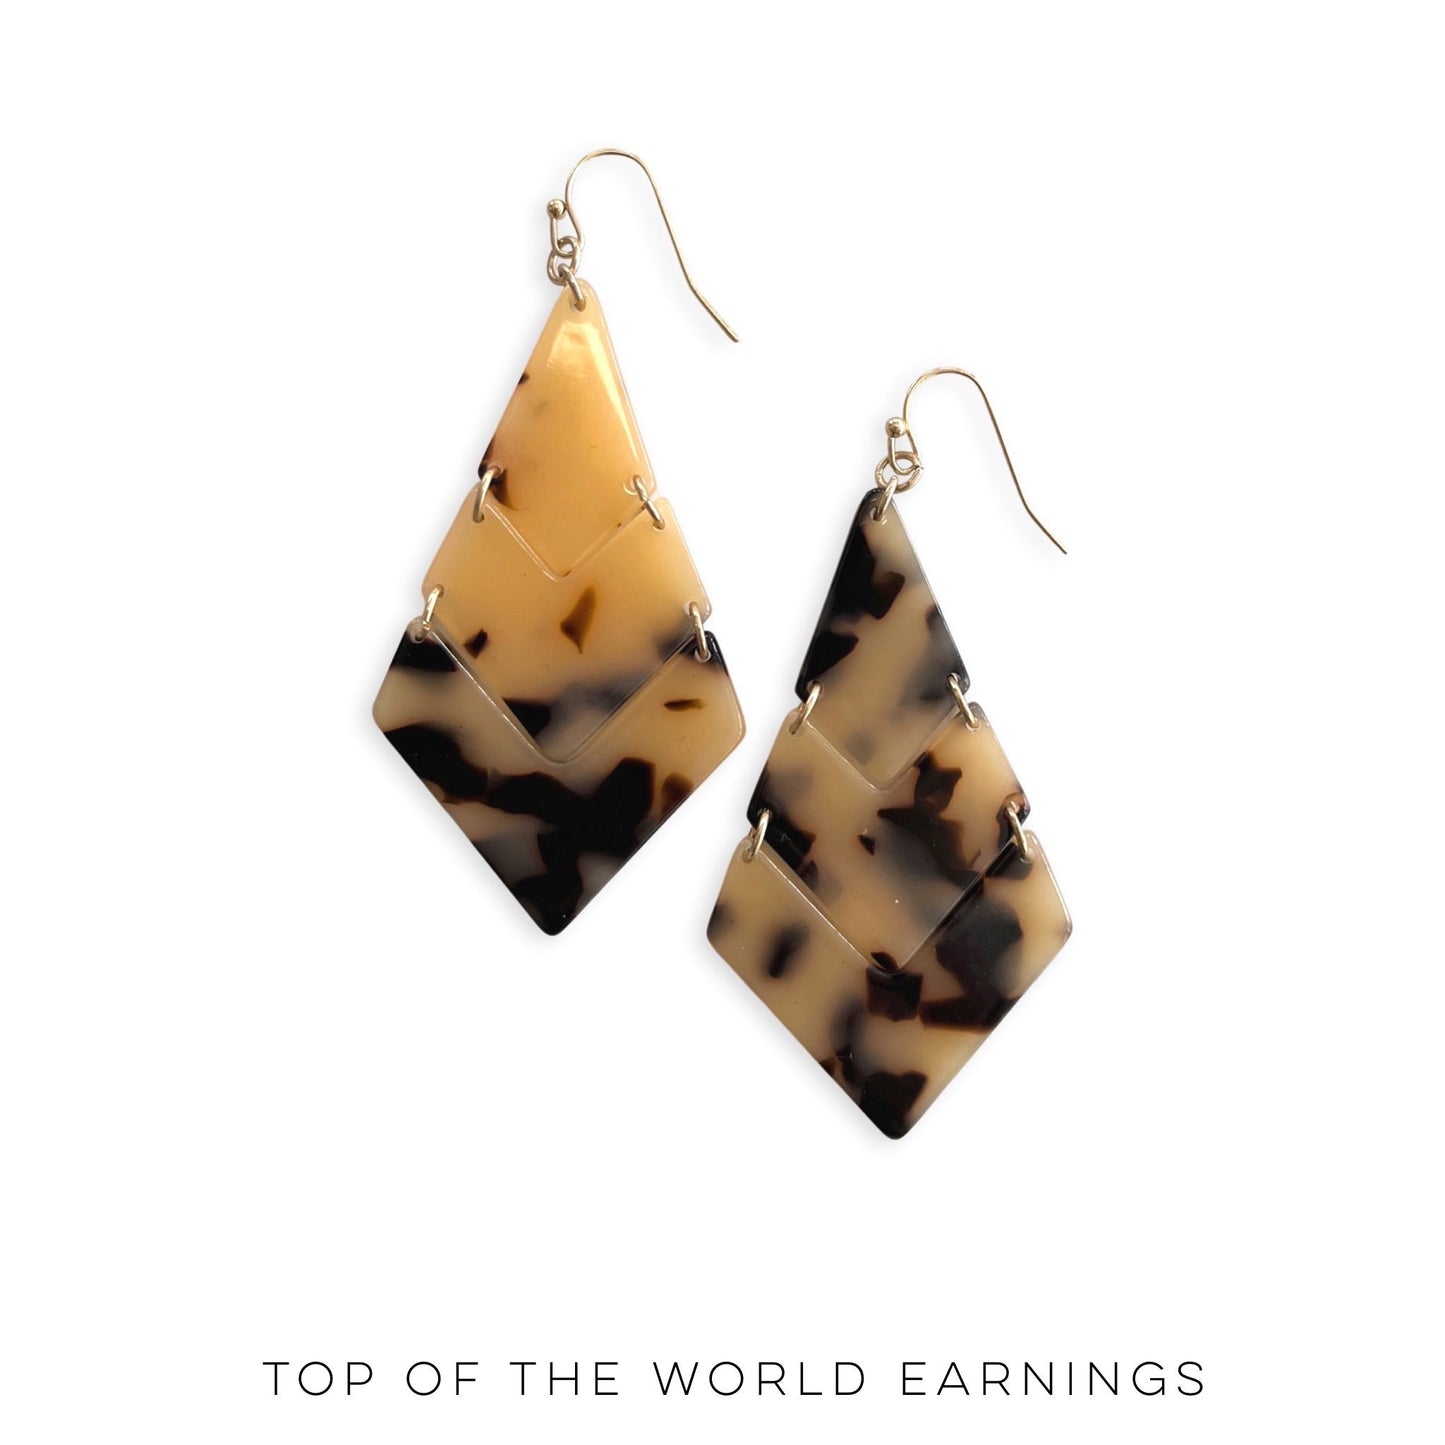 Top of the World Earrings